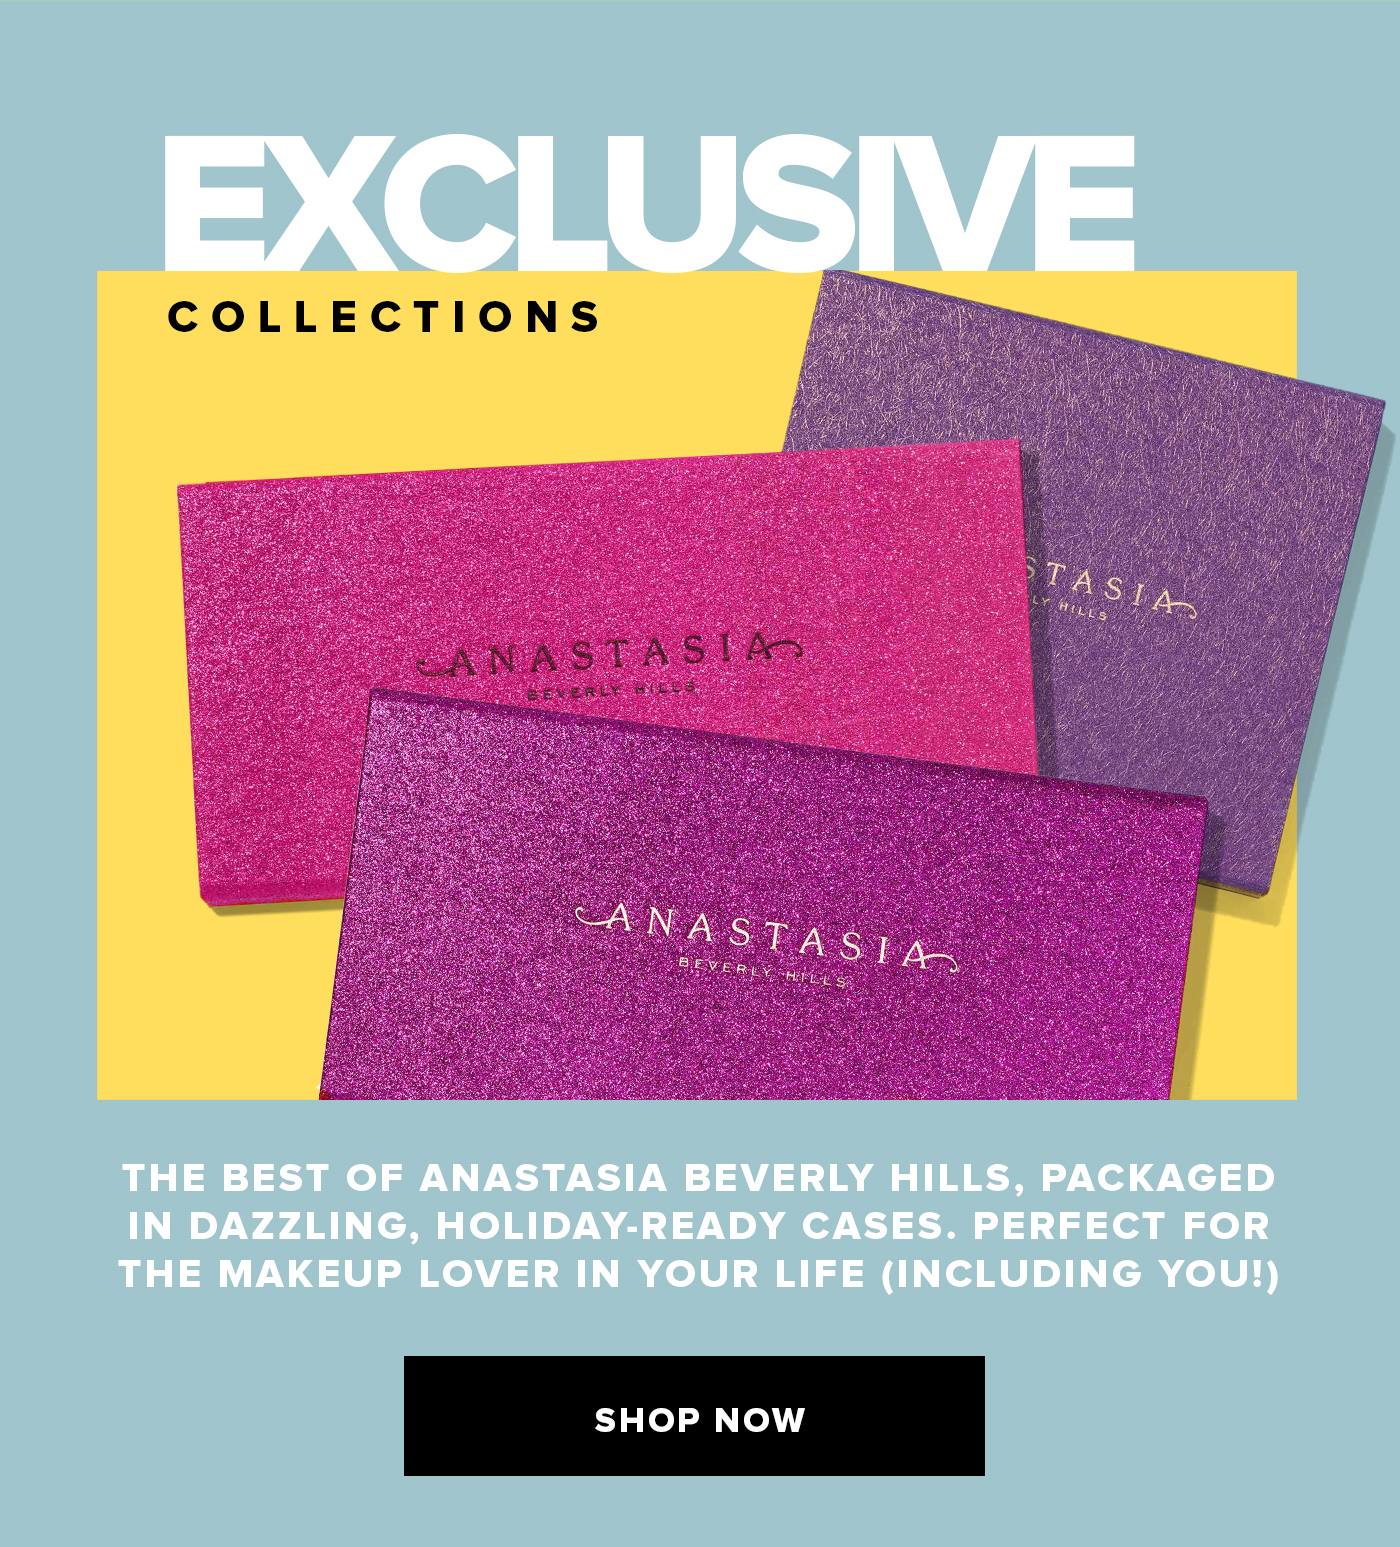 EXCLUSIVE COLLECTIONS. THE BEST OF ANASTASIA BEVERLY HILLS, PACKAGED IN DAZZING, HOLIDAY-READY CASES. PERFECT FOR THE MAKEUP LOVER IN YOUR LIFE(INCLUDING YOU!). SHOP NOW